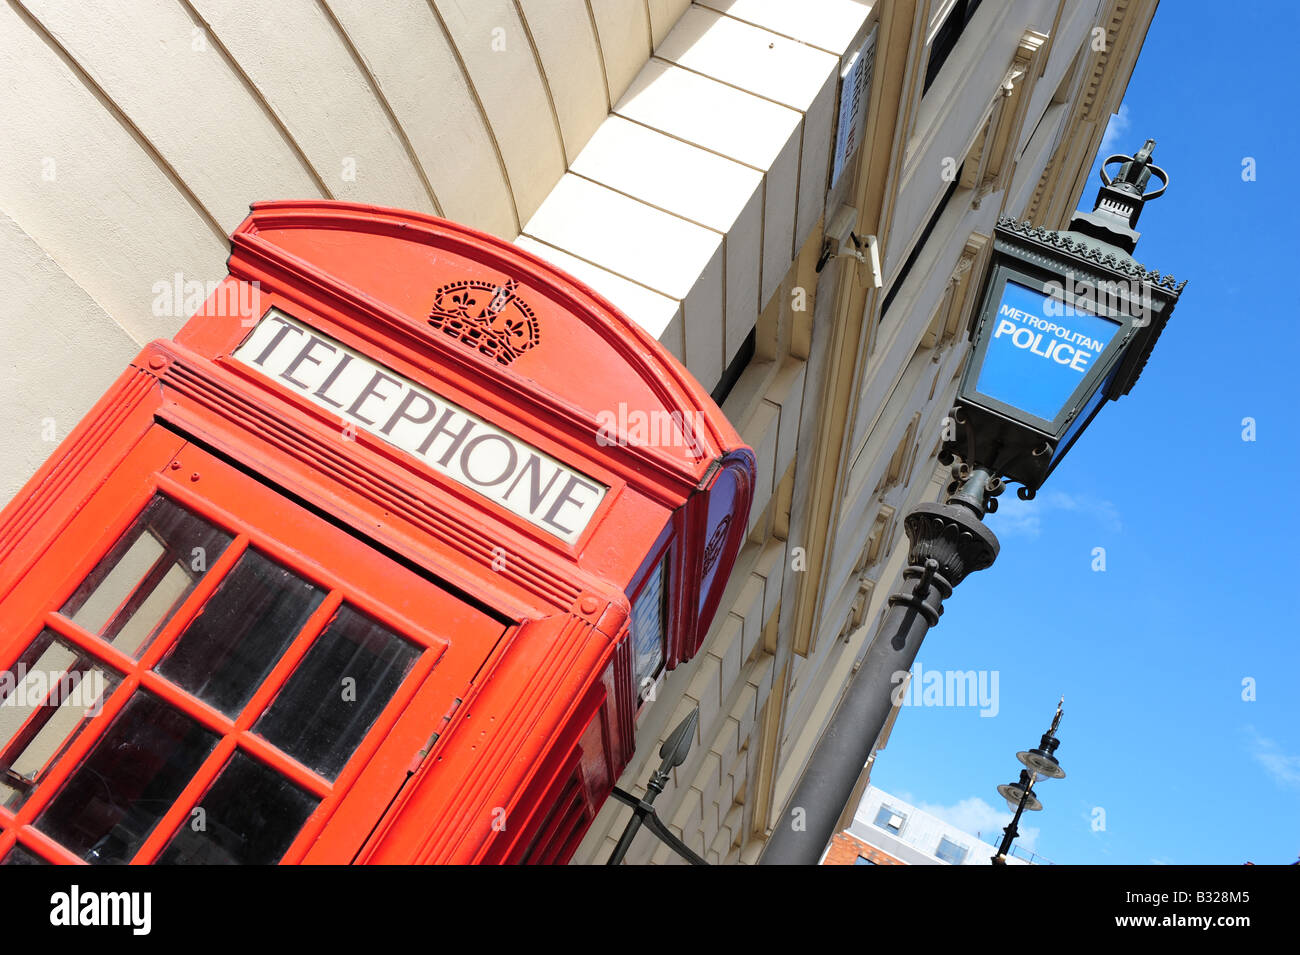 red telephone box and police sign london england call box communications help tourists law post lamp post Stock Photo